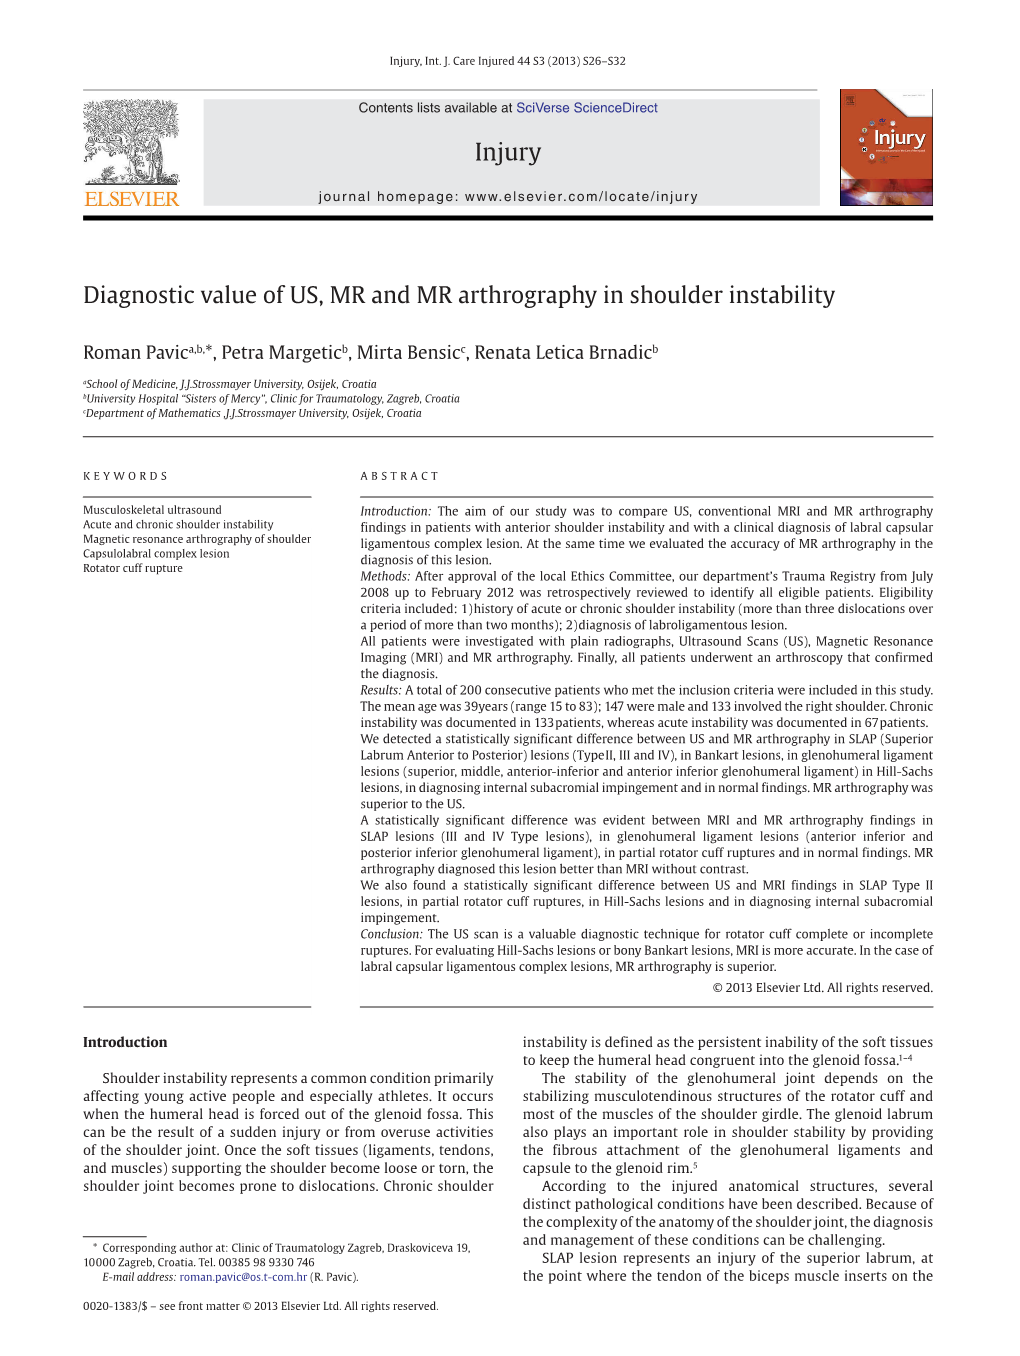 Diagnostic Value of US, MR and MR Arthrography in Shoulder Instability